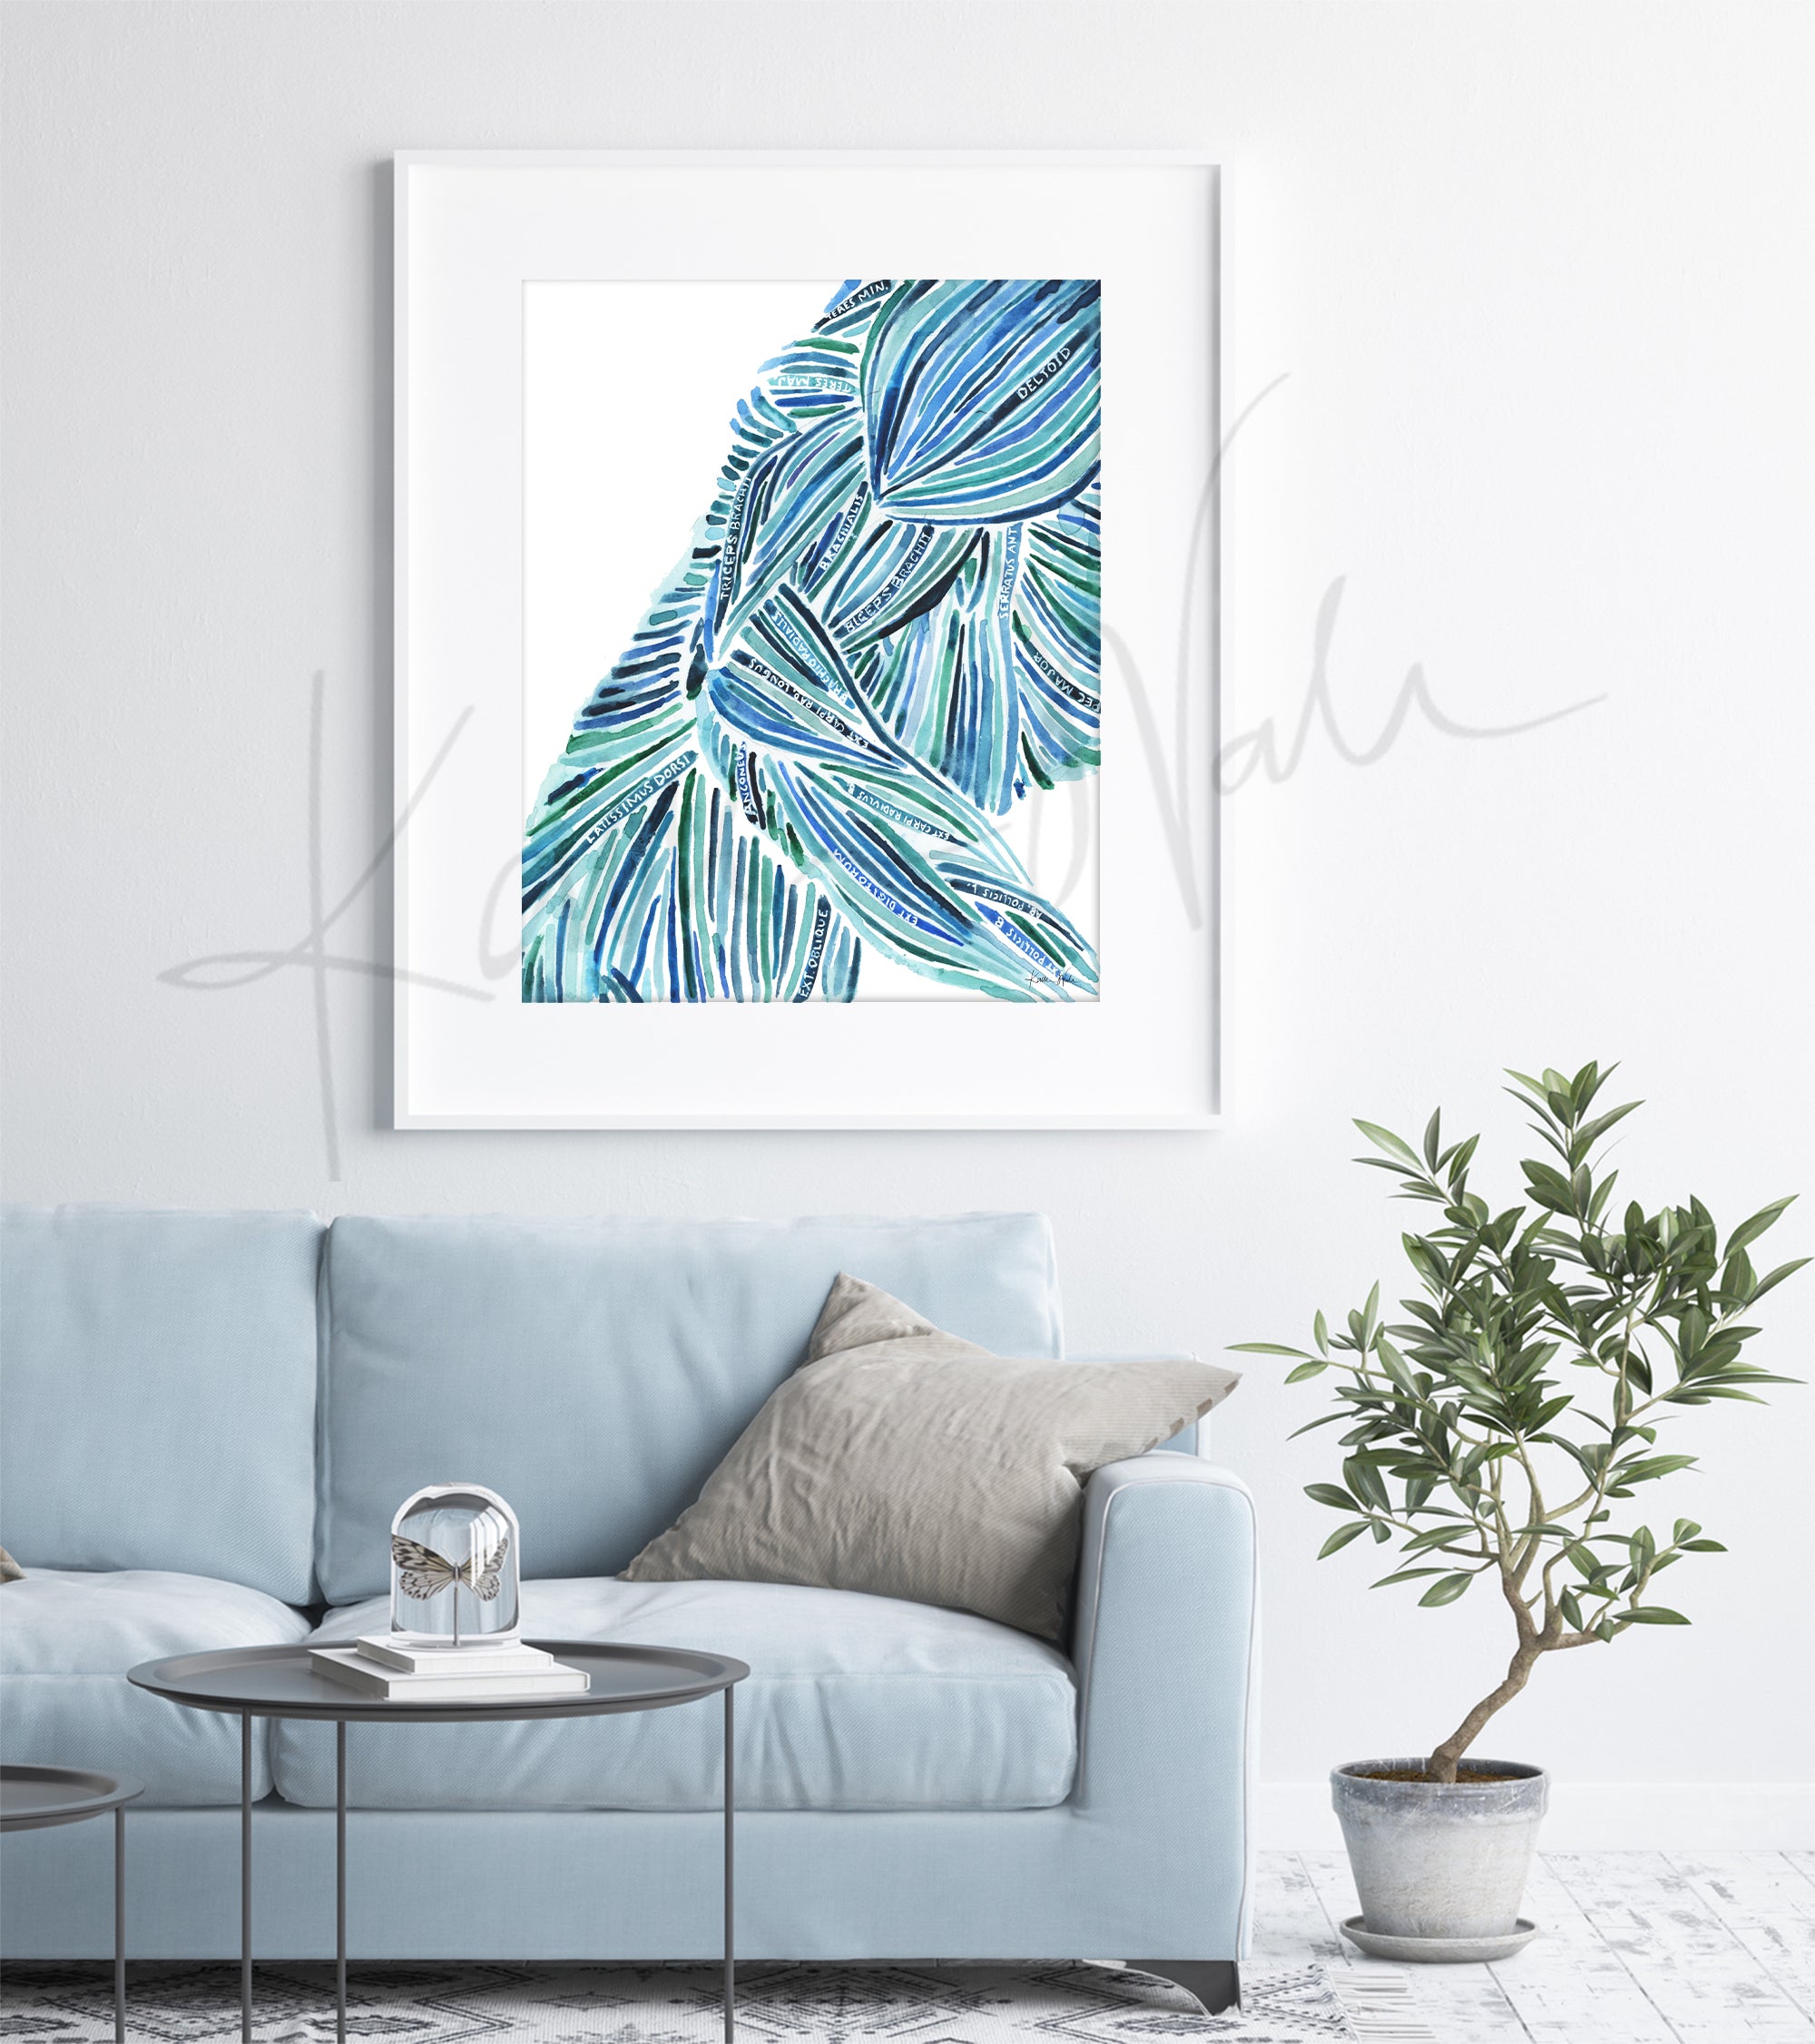 Framed watercolor painting of an abstract body with labeled muscles. The painting is hanging over a blue couch.